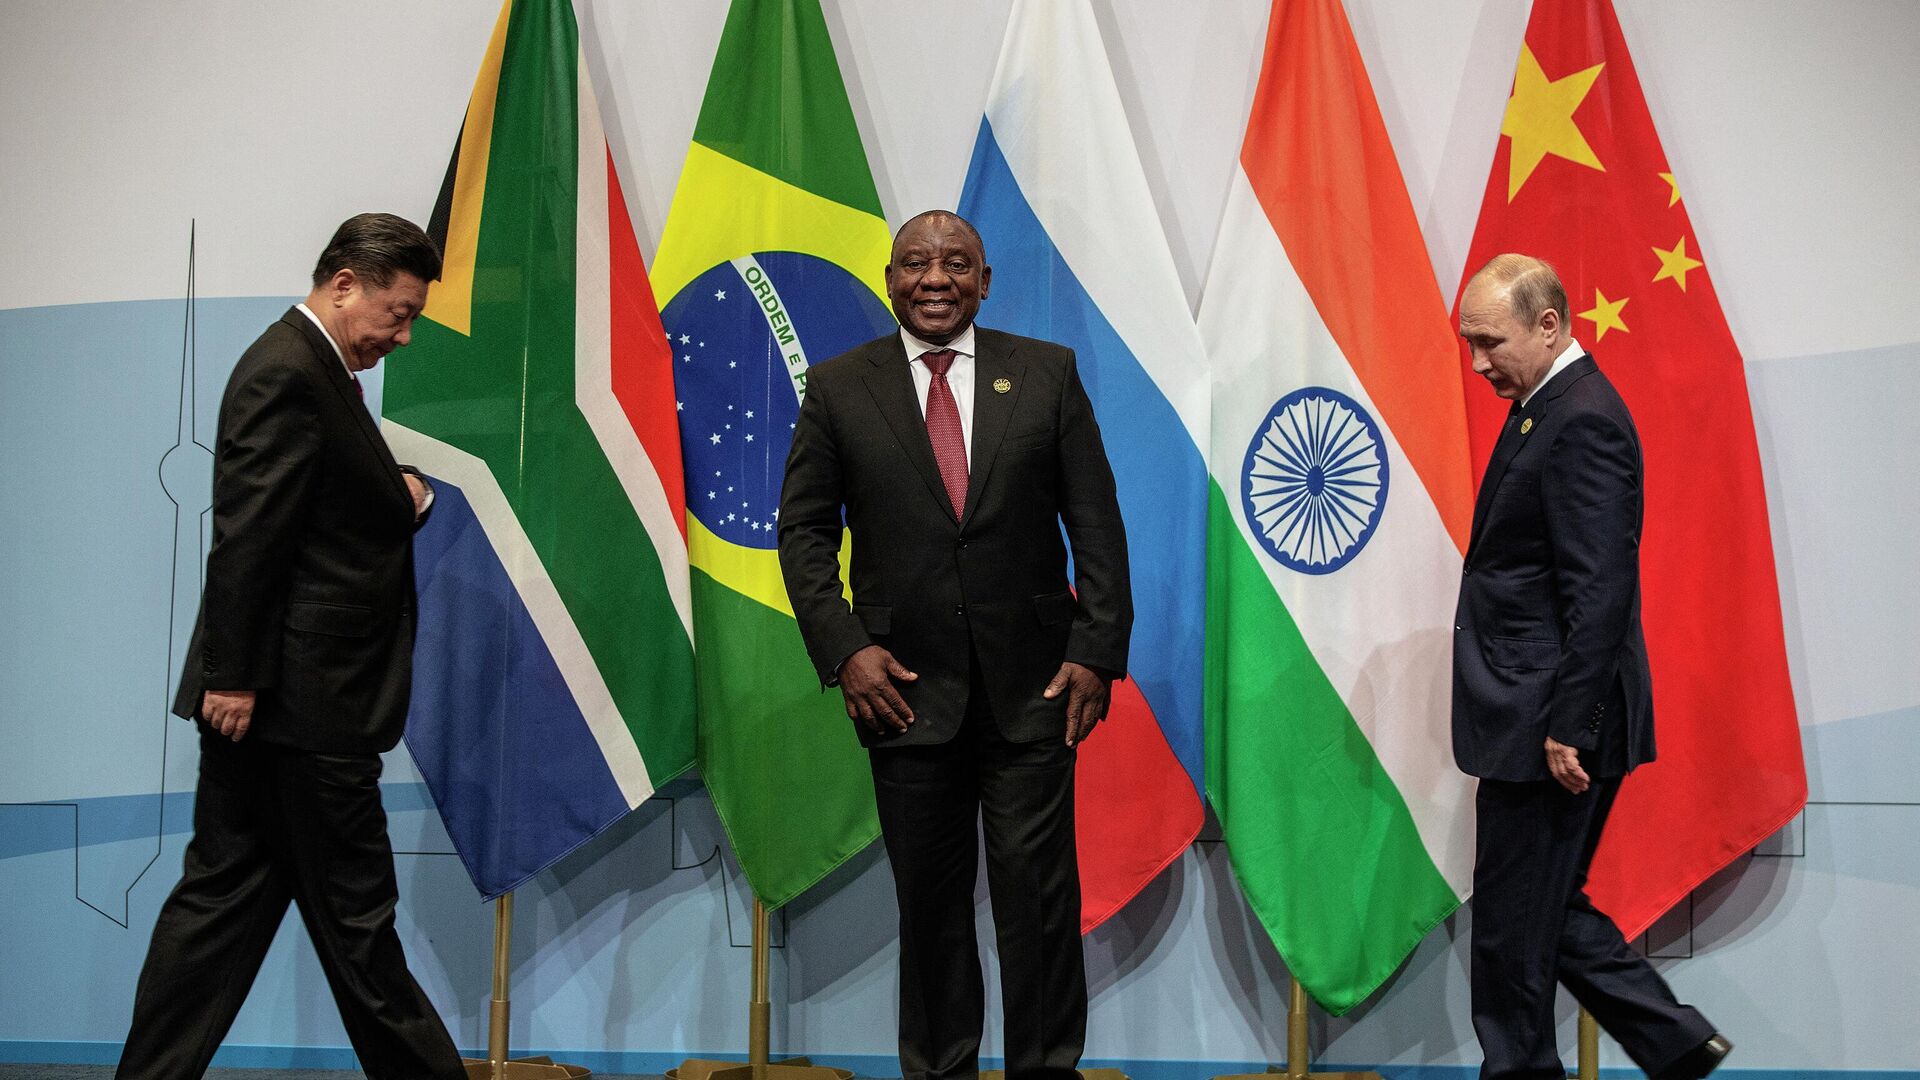 (LtoR) China's President Xi Jinping, South African President Cyril Ramaphosa and Russian President Vladimir Putin gather to pose for a group picture during the 10th BRICS (acronym for the grouping of the world's leading emerging economies, namely Brazil, Russia, India, China and South Africa) summit on July 26, 2018, at the Sandton Convention Centre in Johannesburg, South Africa. - Sputnik International, 1920, 22.08.2023